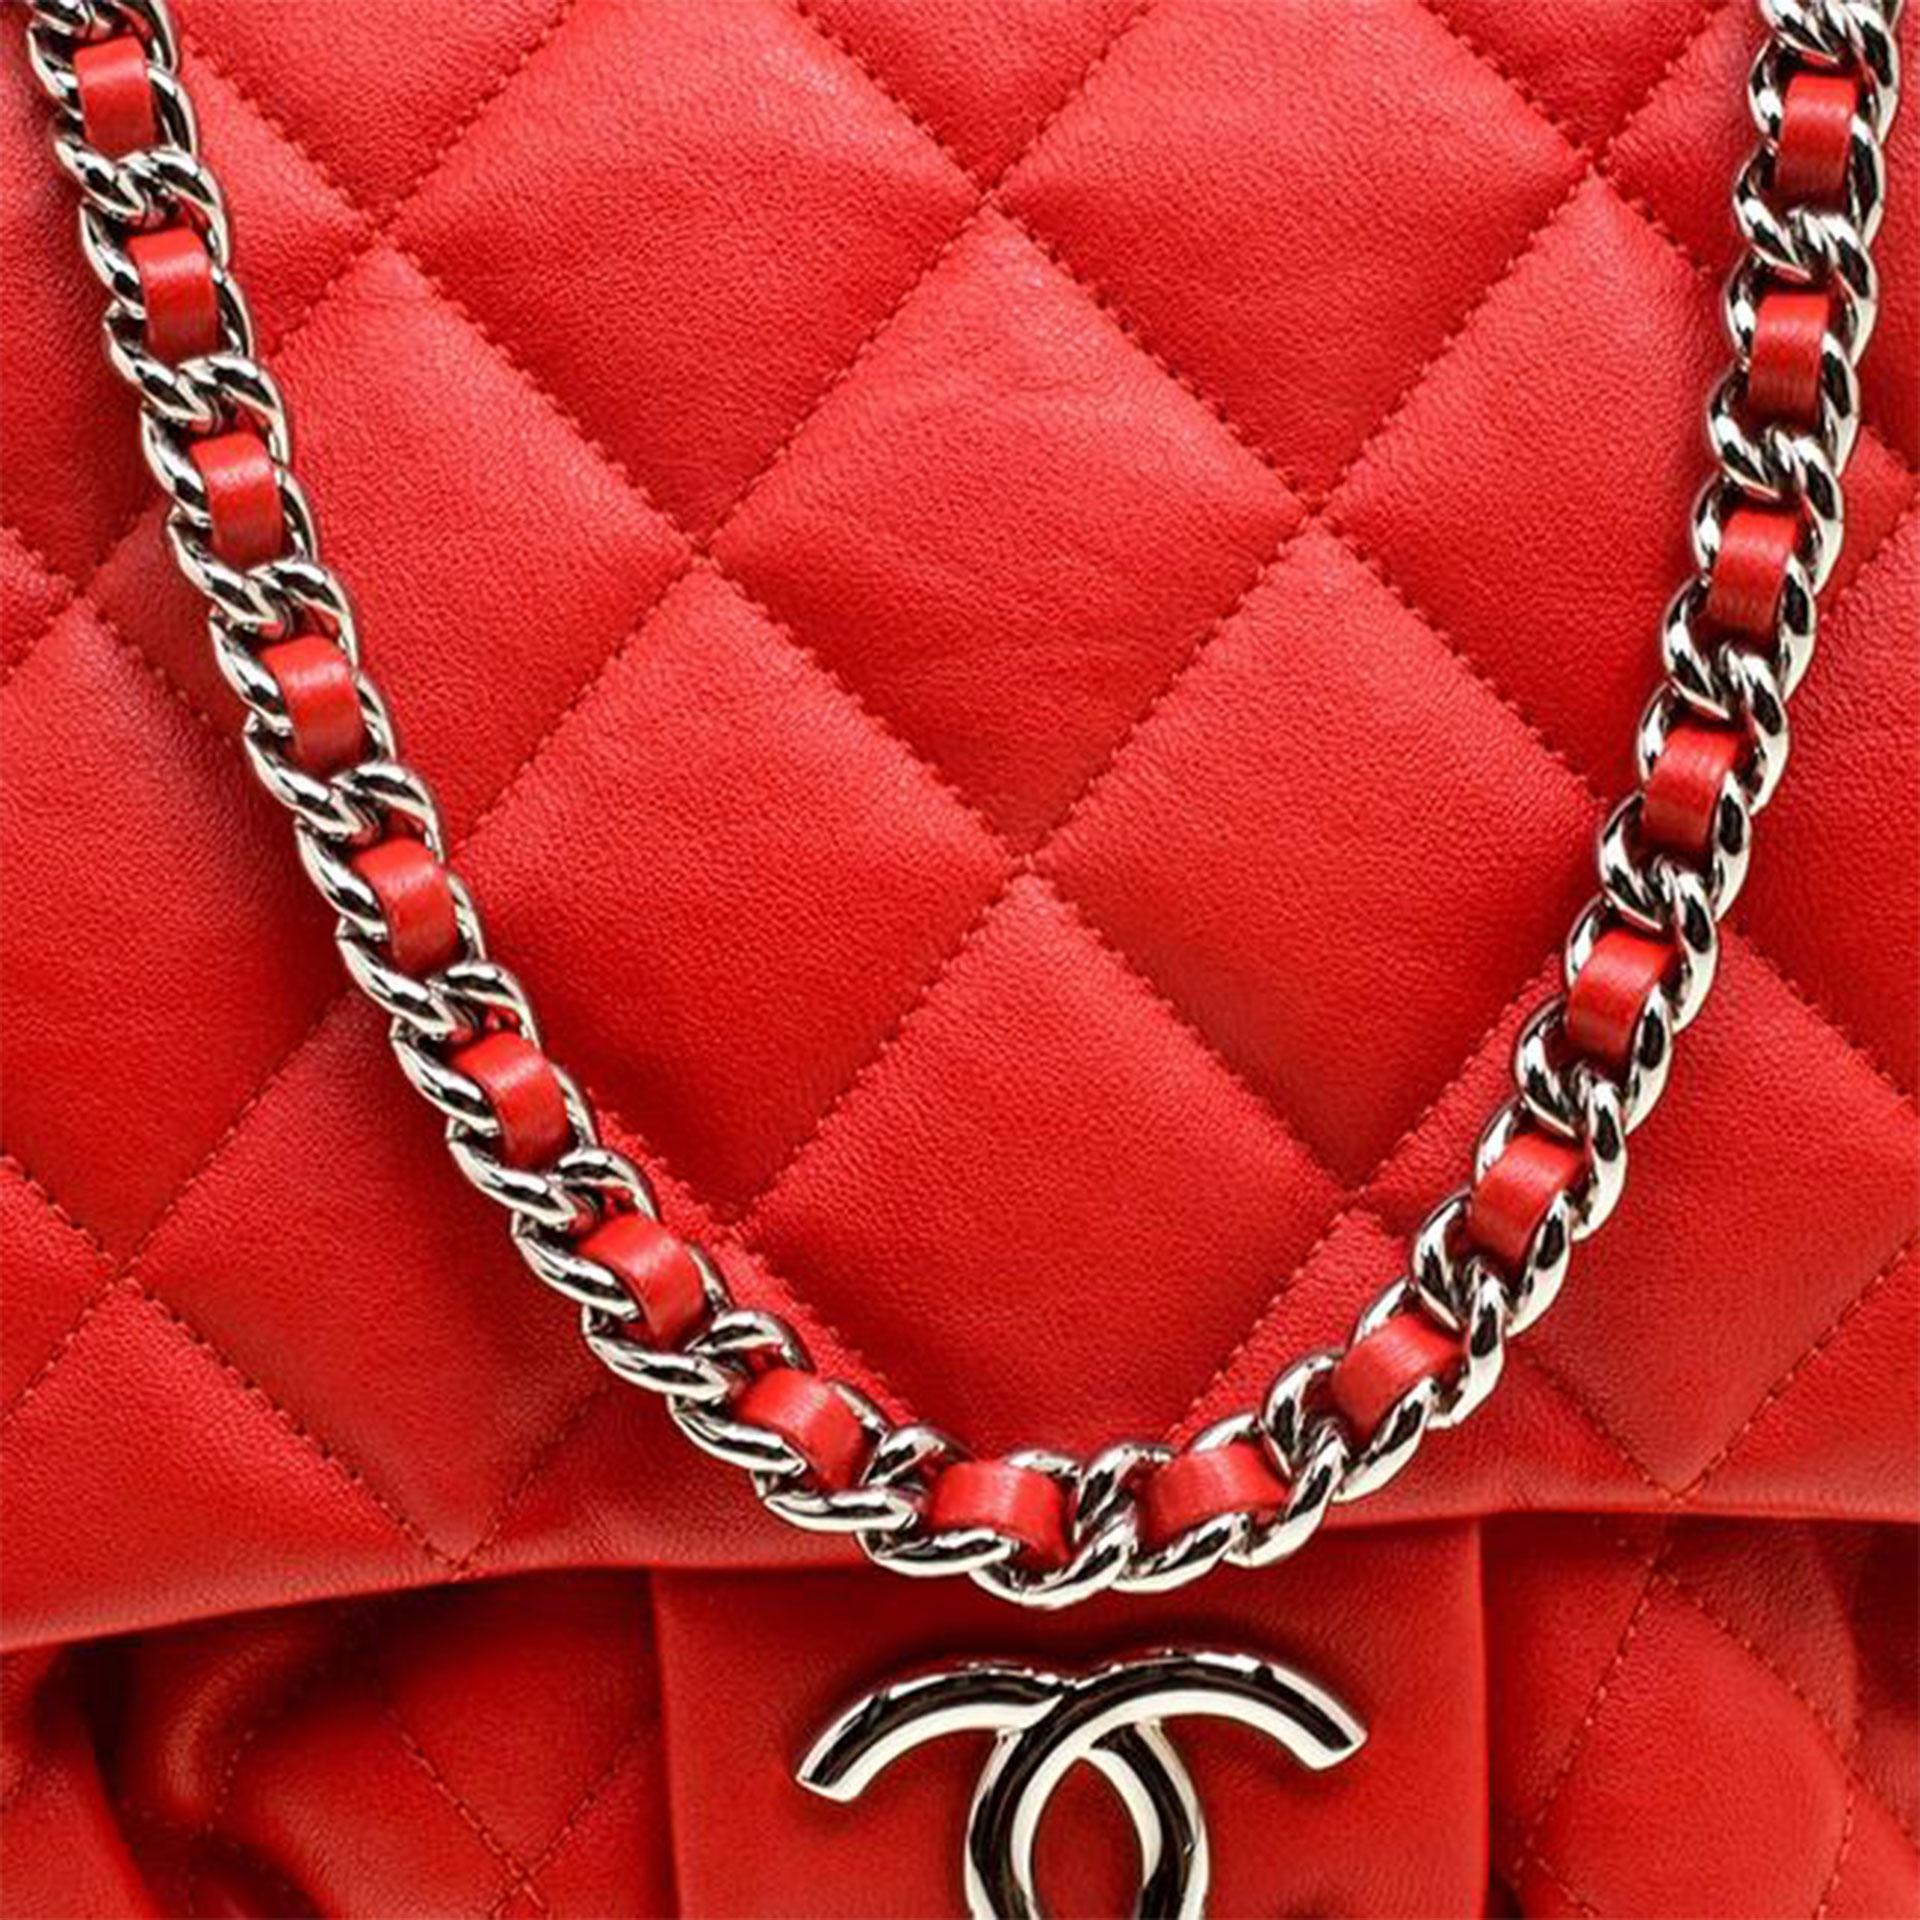 Chanel Large Chain Around Limited Edition Pristine Red Calfskin Leather Flap Bag 1